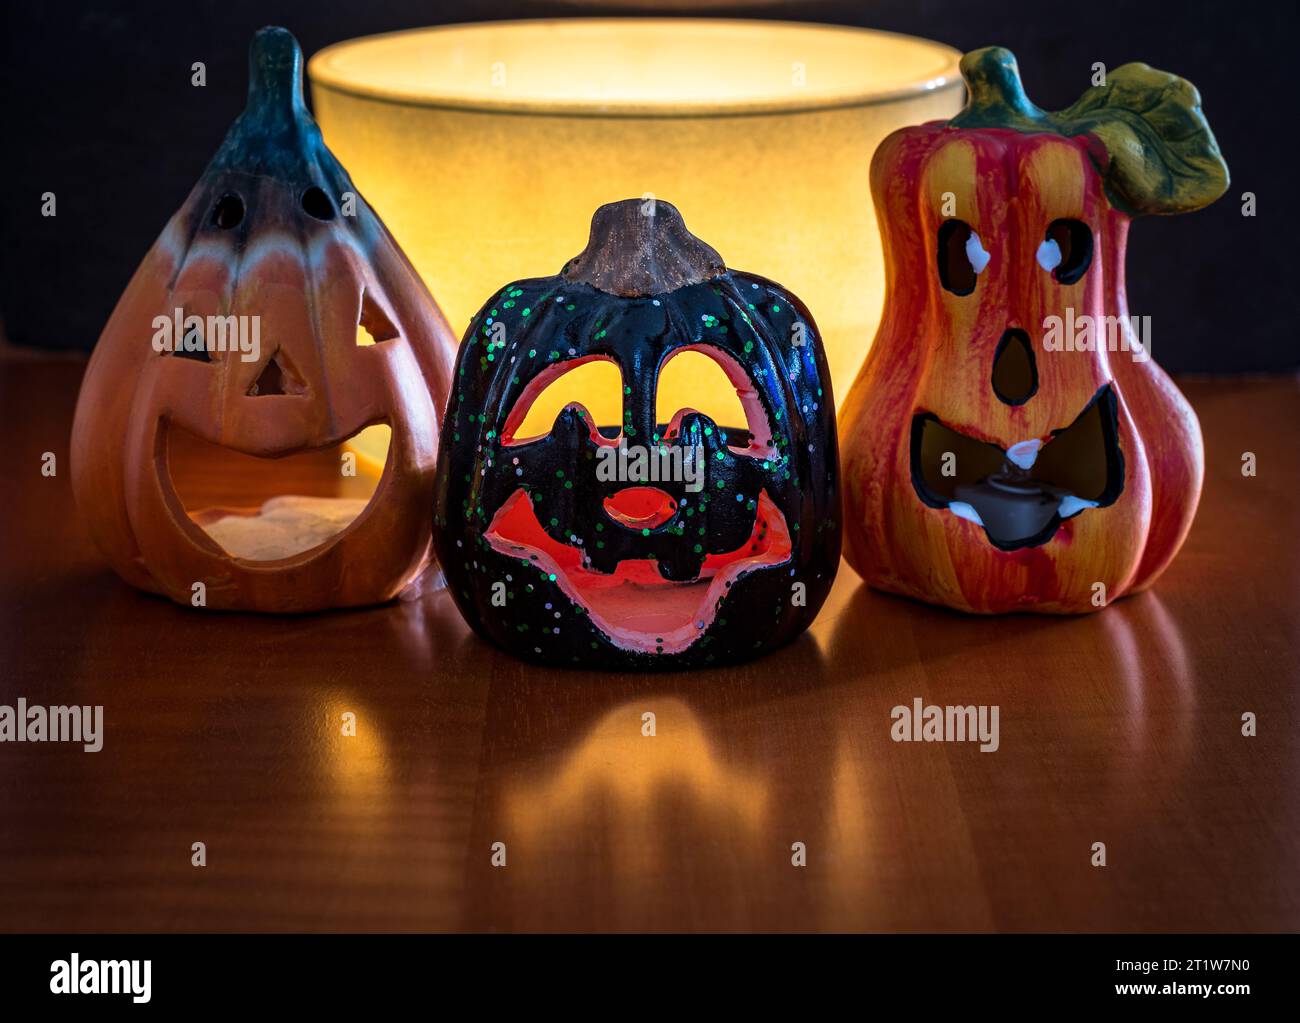 Three small and funny Halloween pumpkins with a large warm light candle behind. Decorations placed on a wooden surface with a black background. Stock Photo